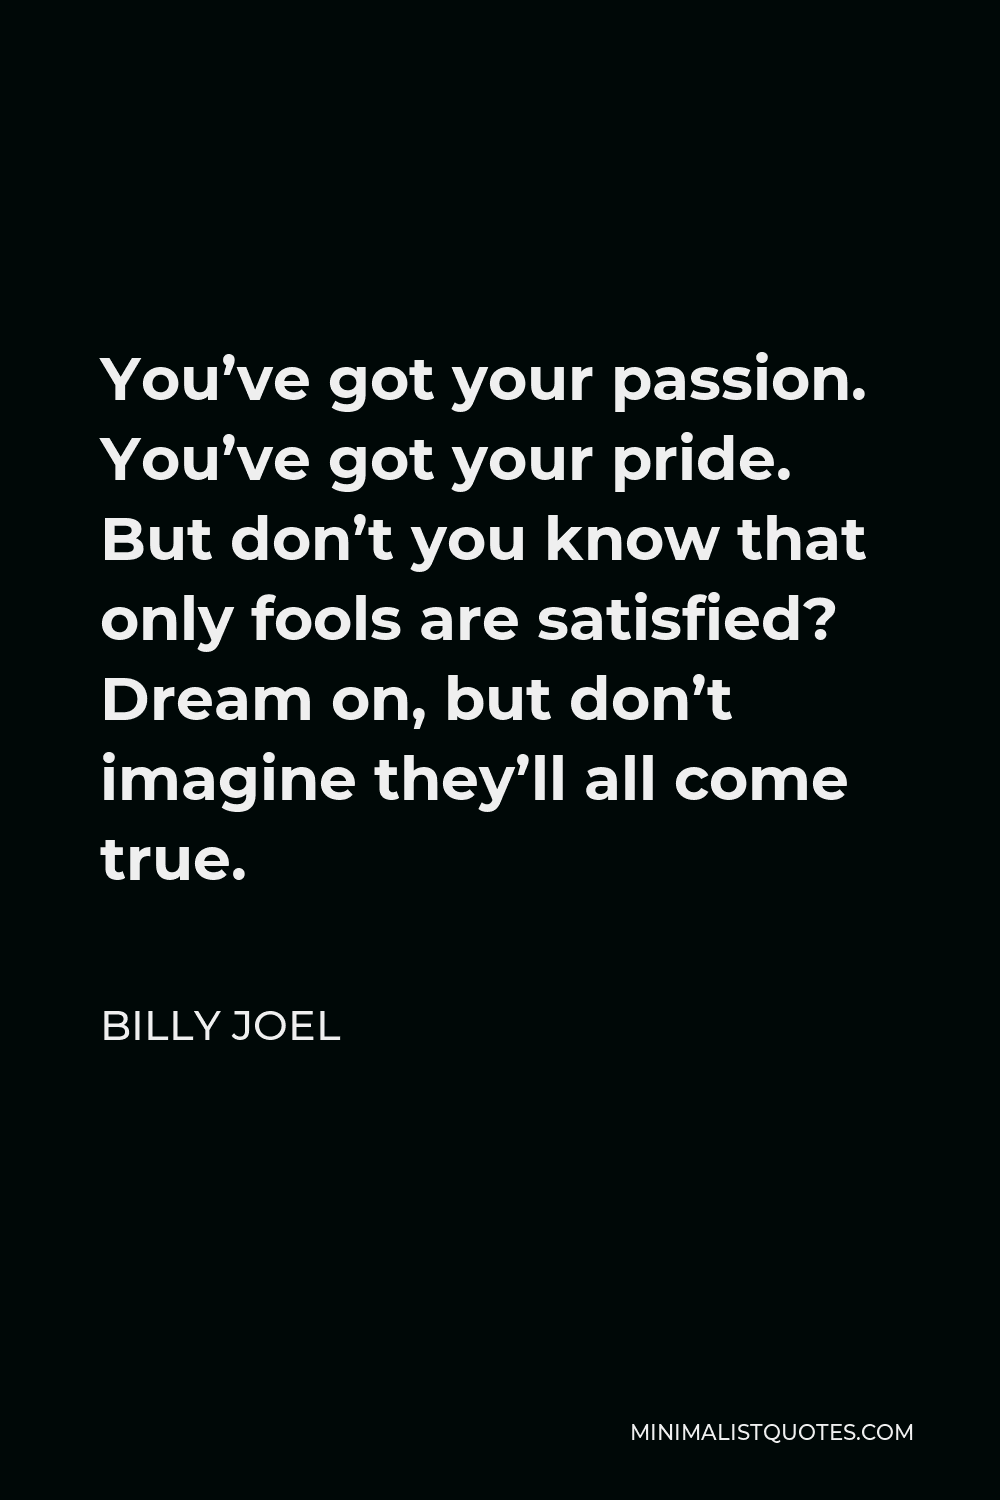 Billy Joel Quote - You’ve got your passion. You’ve got your pride. But don’t you know that only fools are satisfied? Dream on, but don’t imagine they’ll all come true.